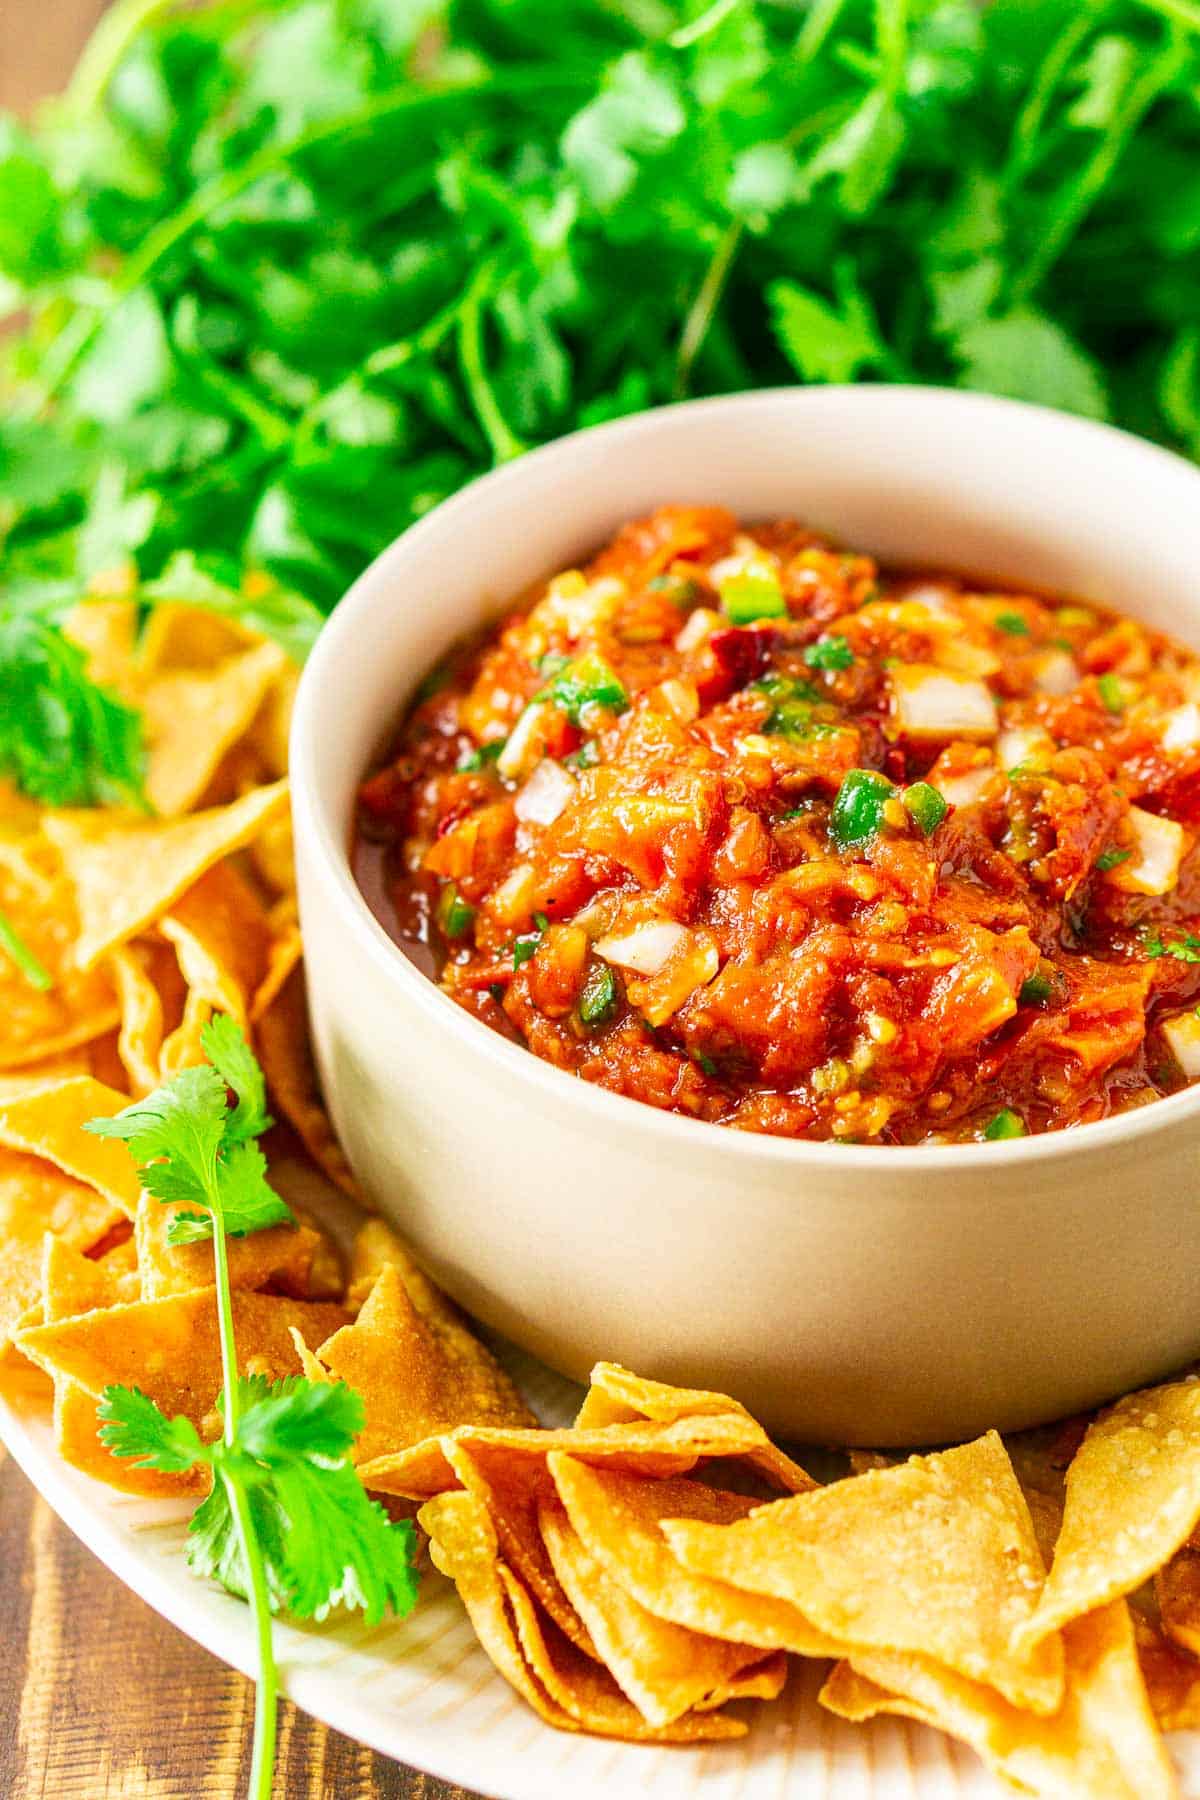 The tomato-chipotle salsa in a bowl with chips and cilantro surrounding it.